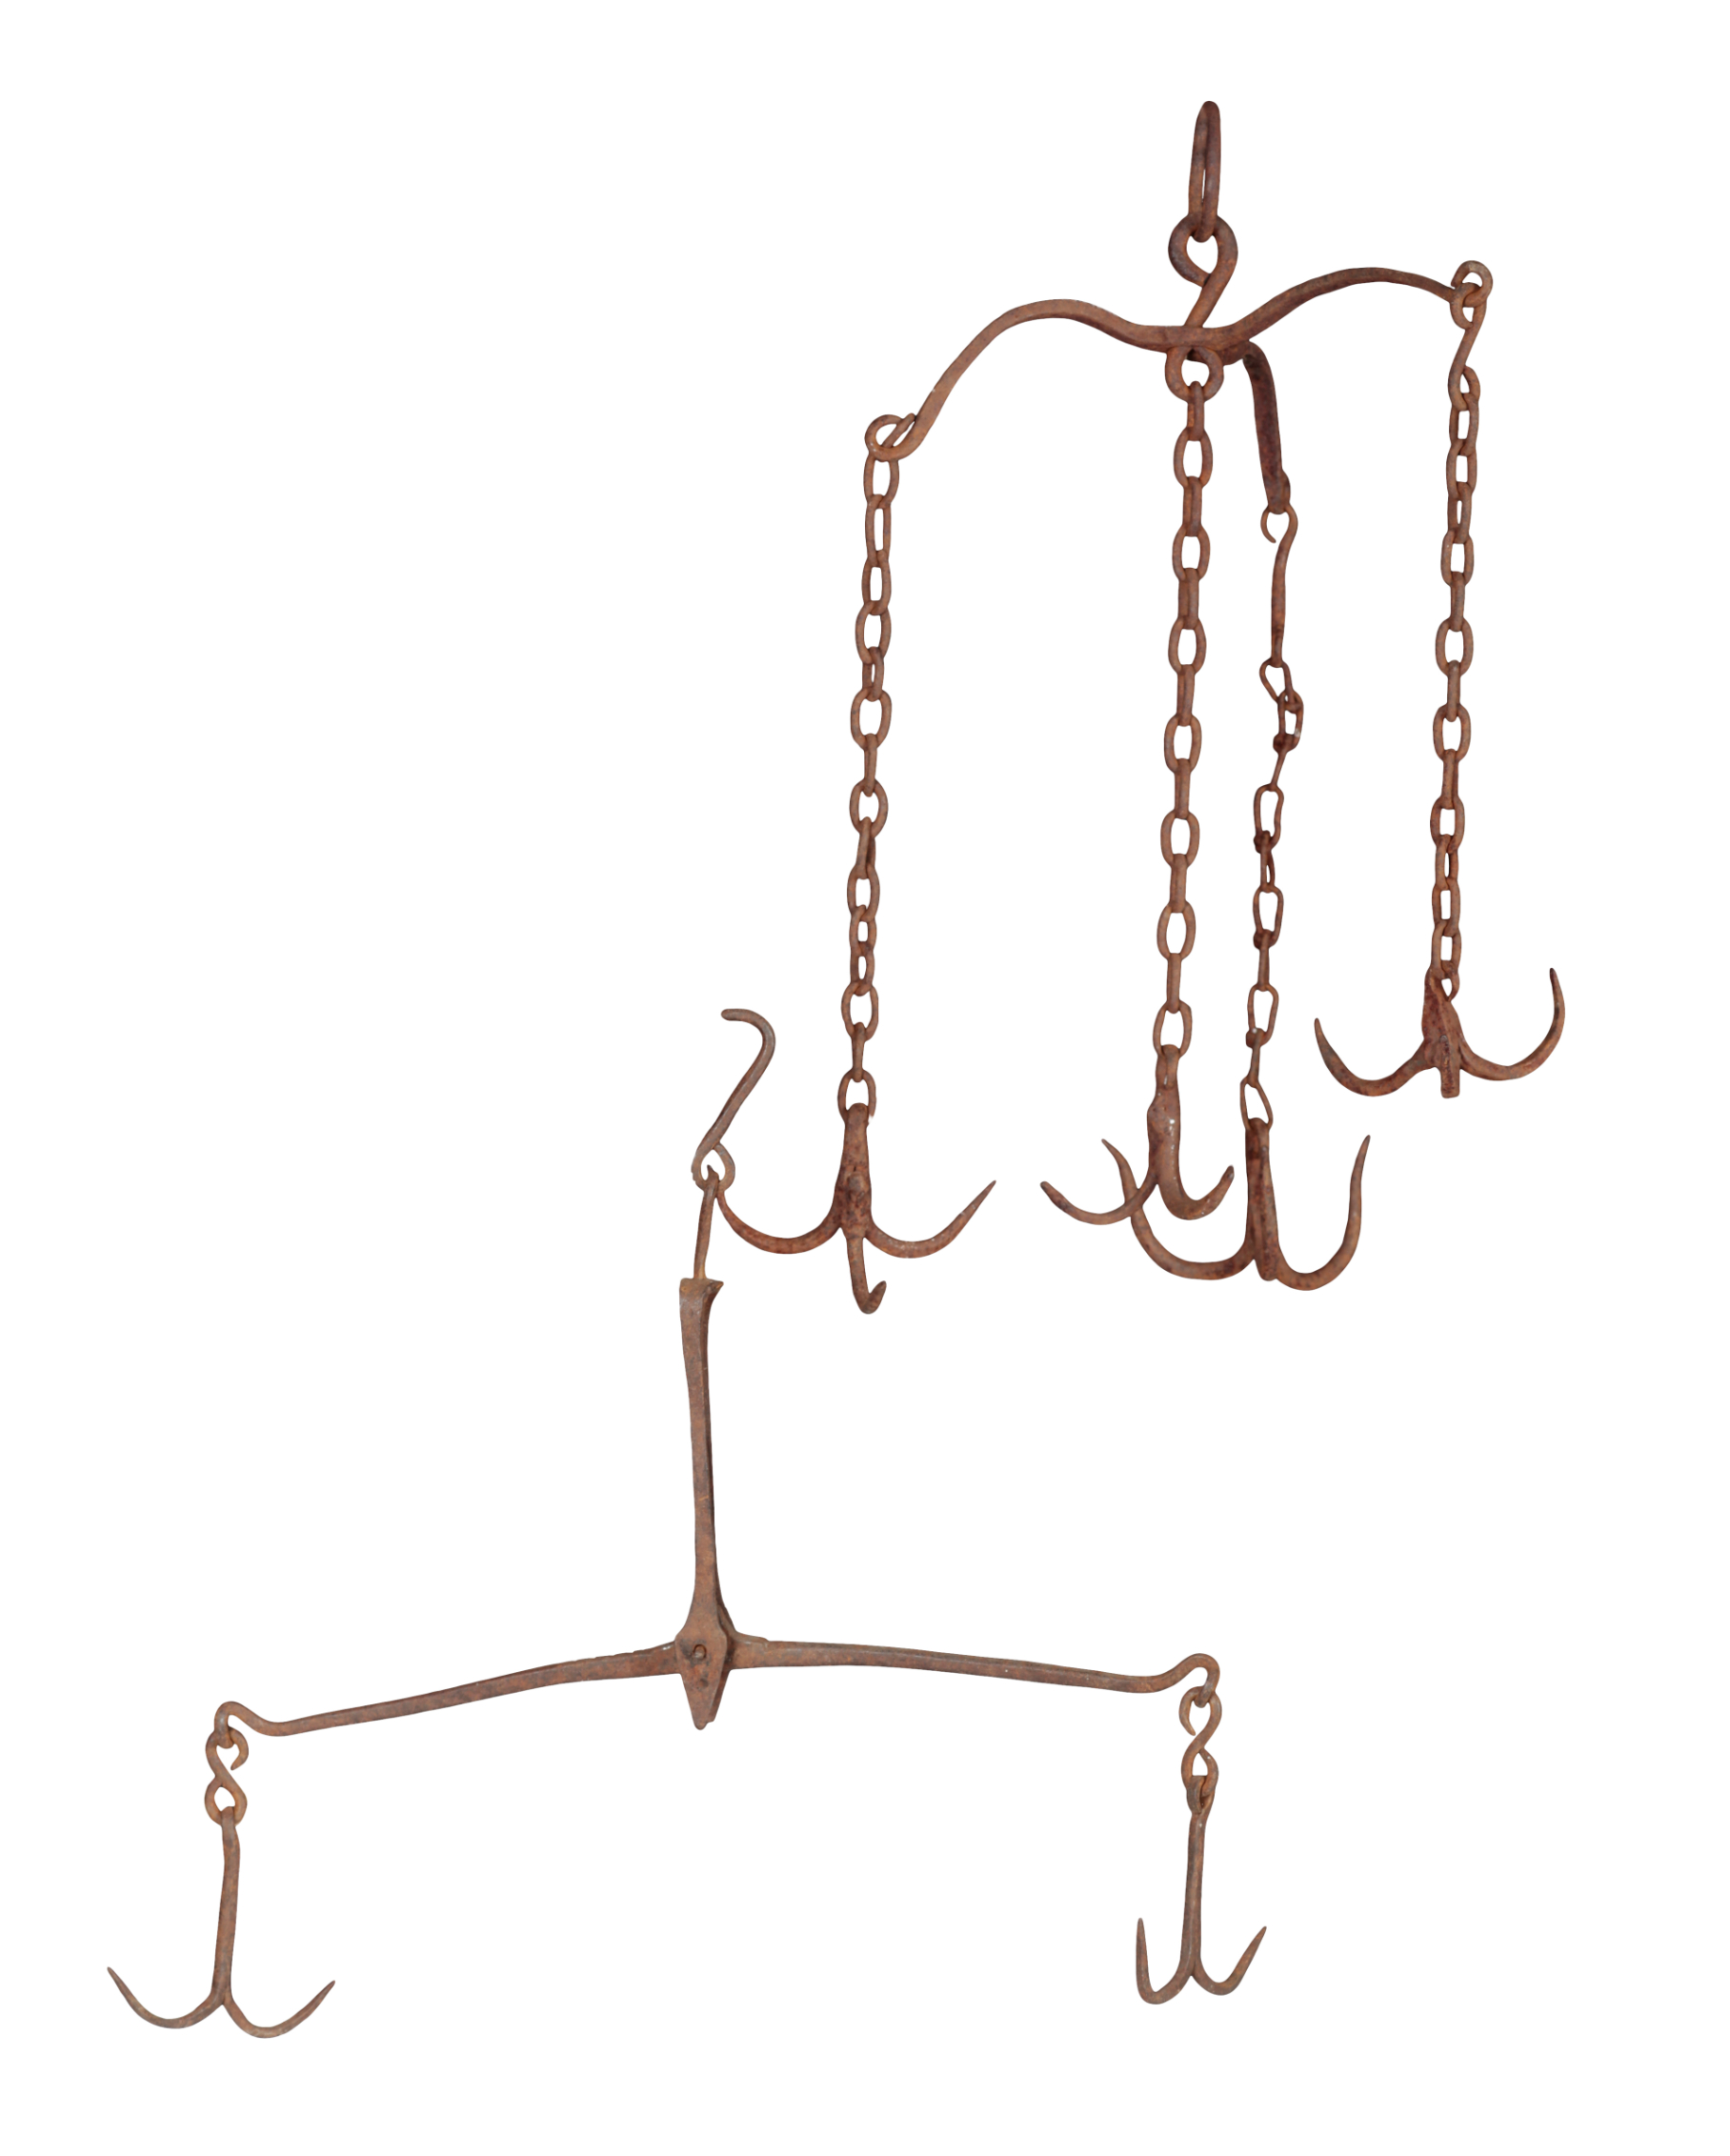 TWO IRON HANGING GAME HOOKS including 31083e